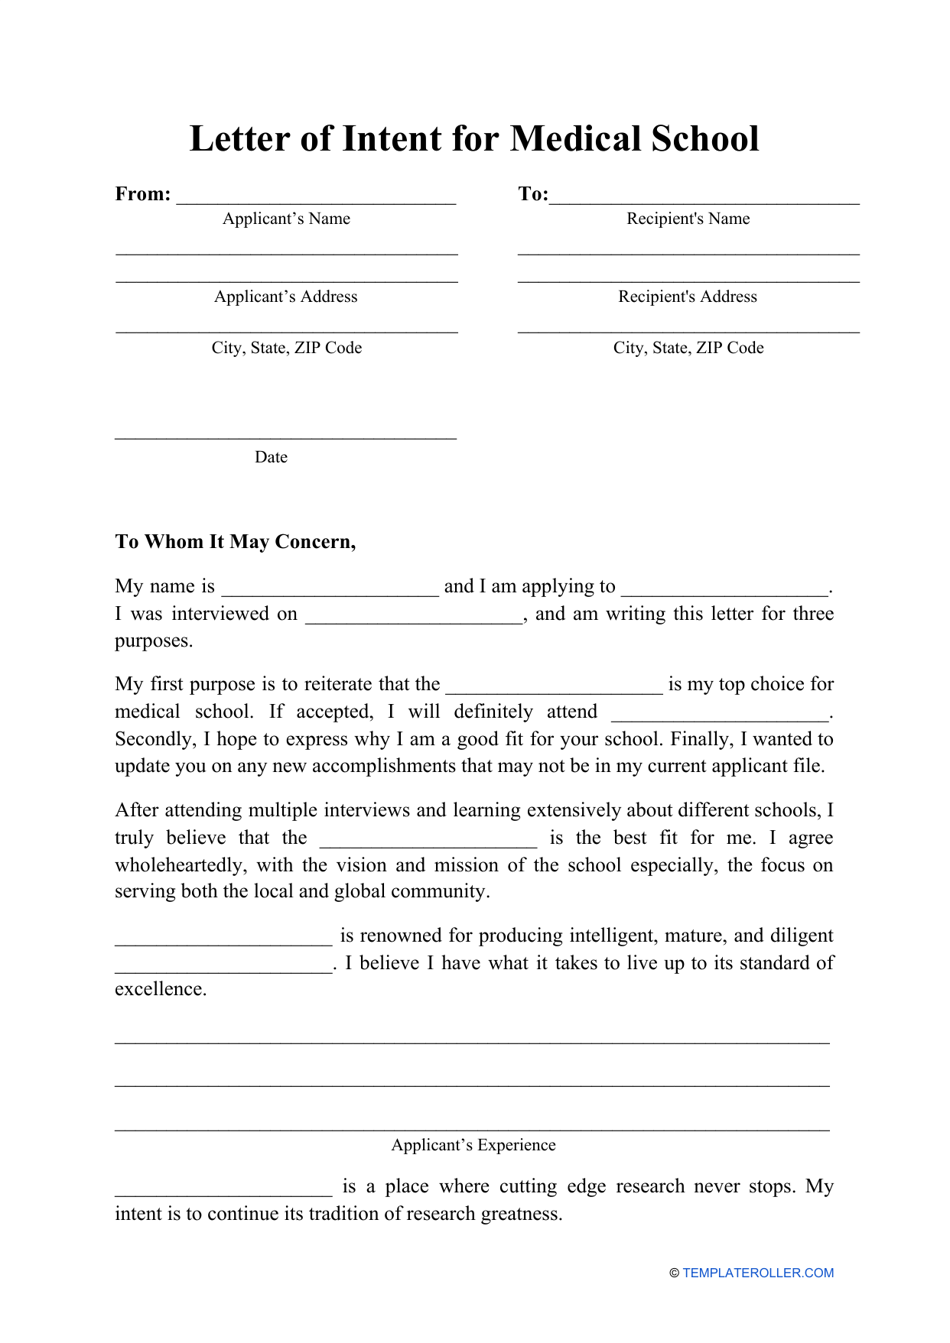 Medical school letter of intent template preview